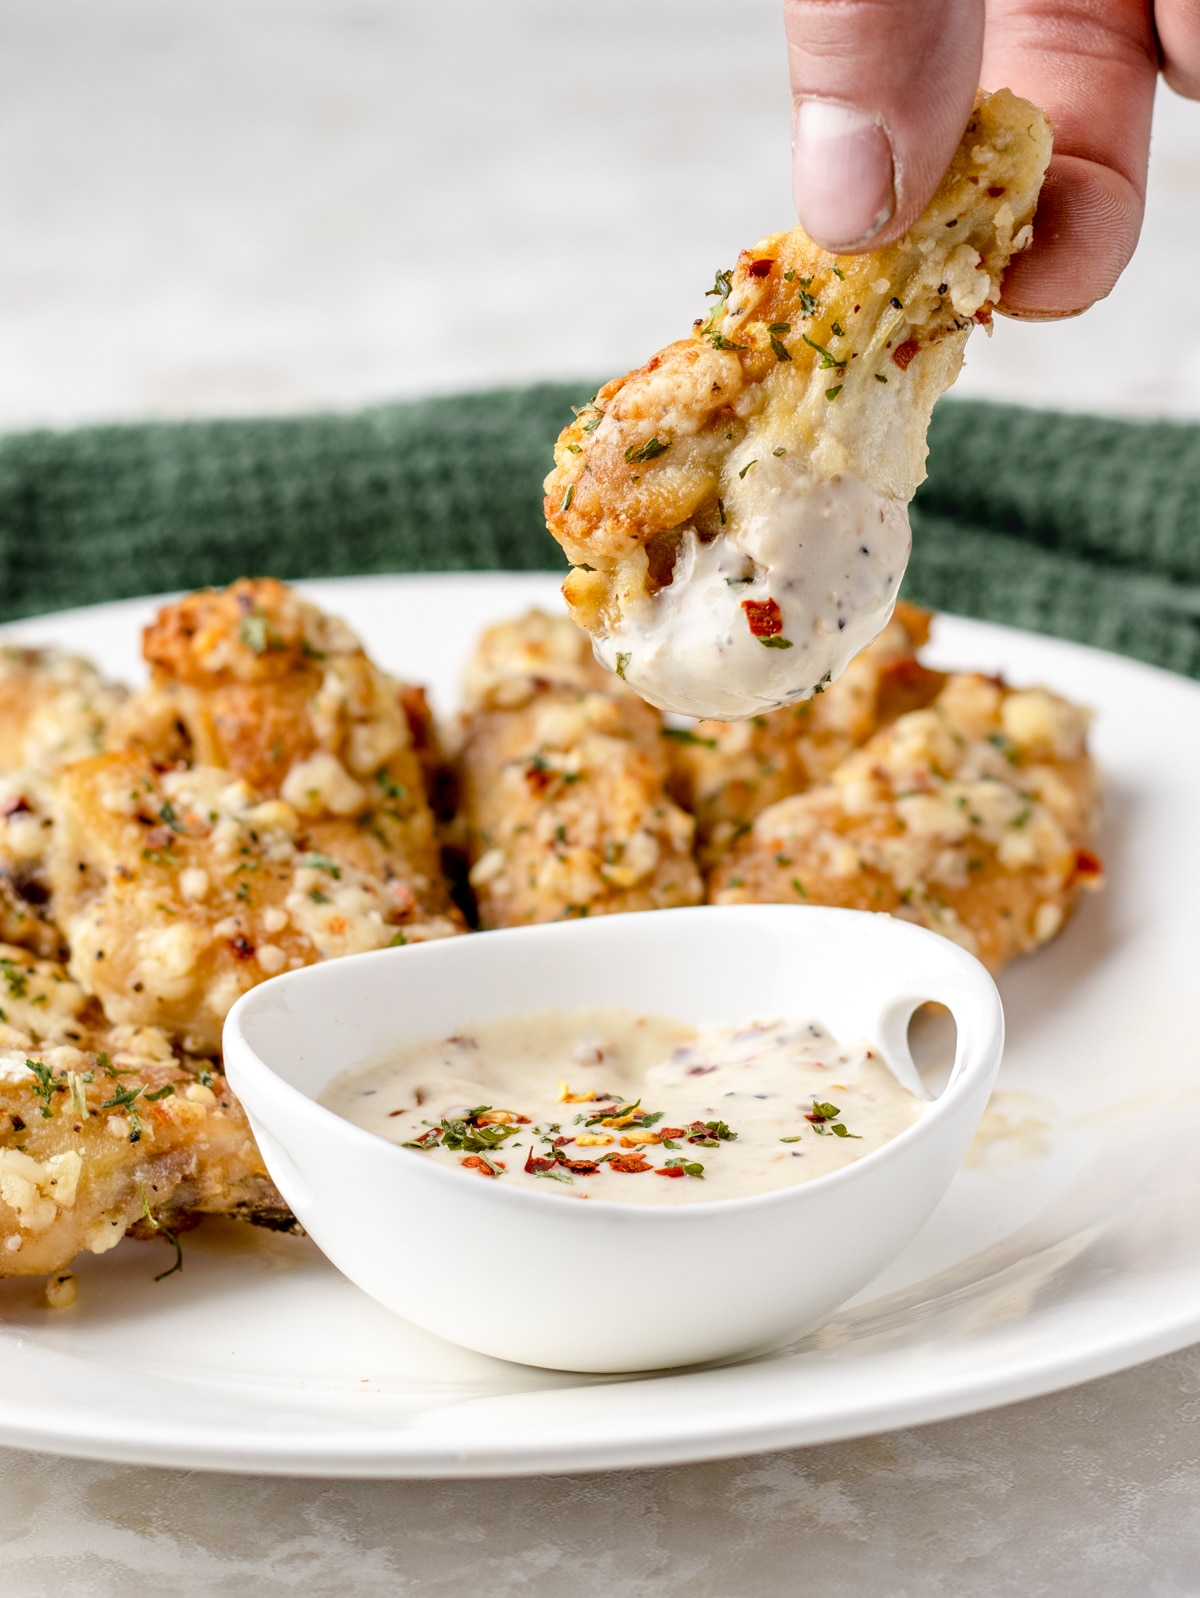 Dipping Garlic Butter Parmesan Wings in sauce